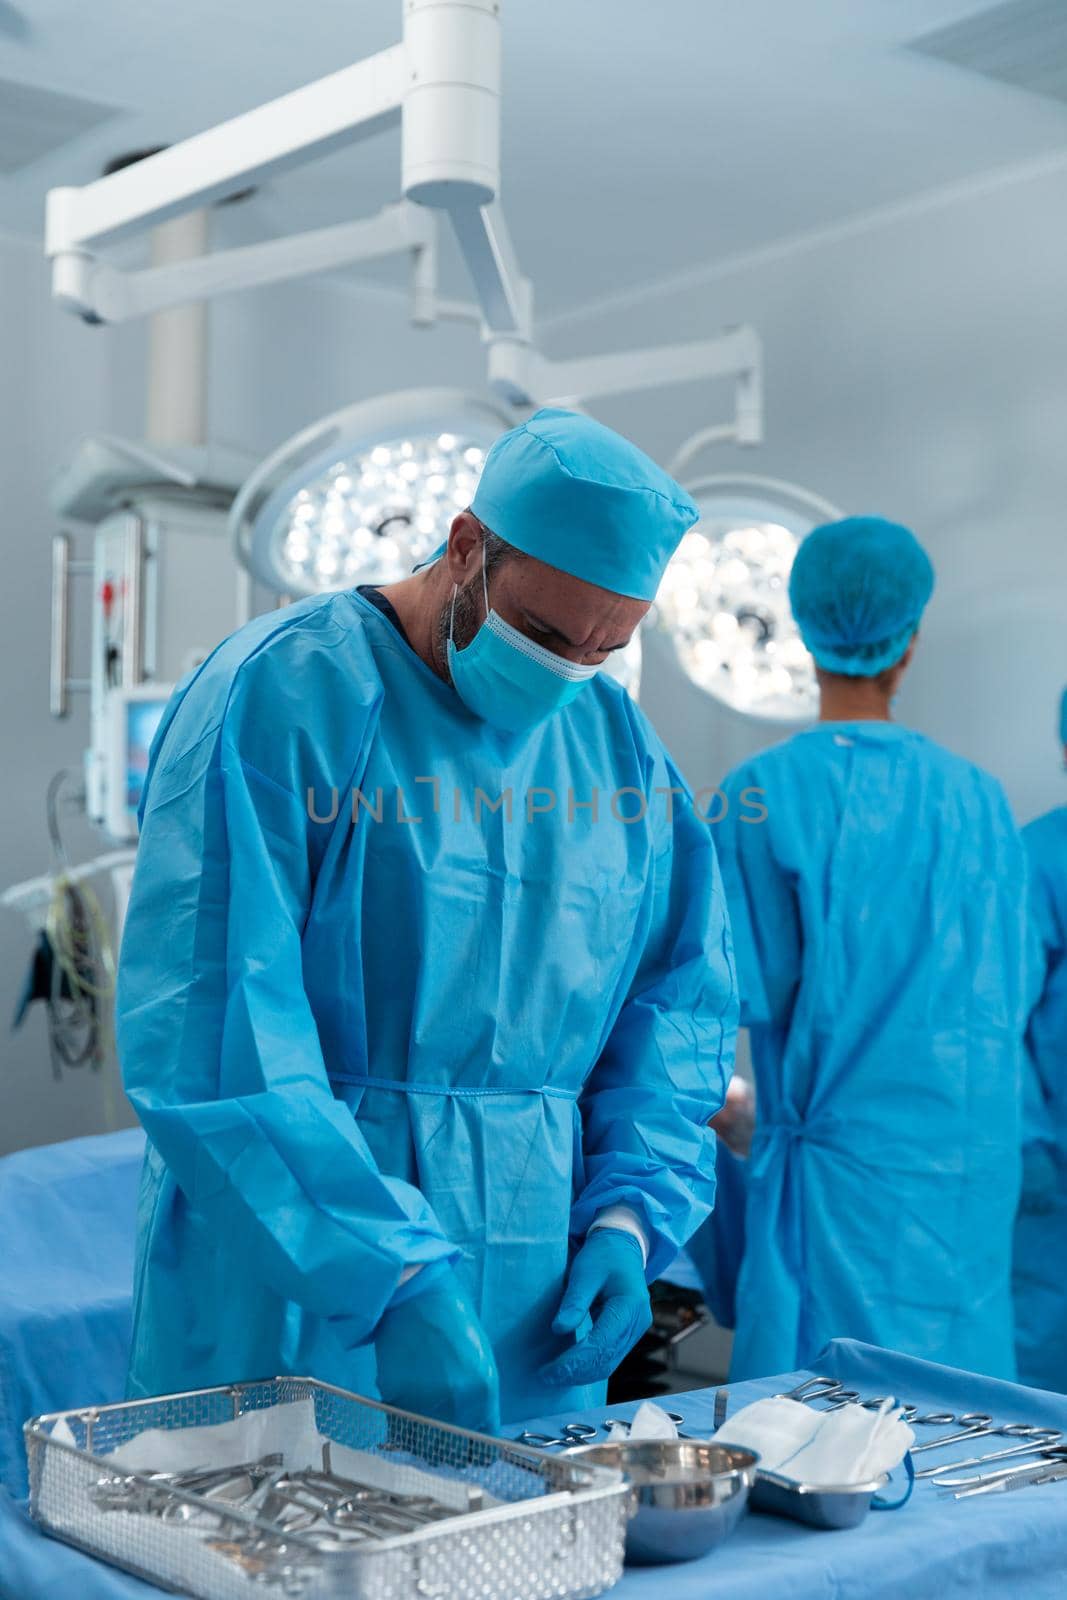 Caucasian male surgeon wearing face mask and protective clothing in operating theatre. medicine, health and healthcare services during covid 19 coronavirus pandemic.